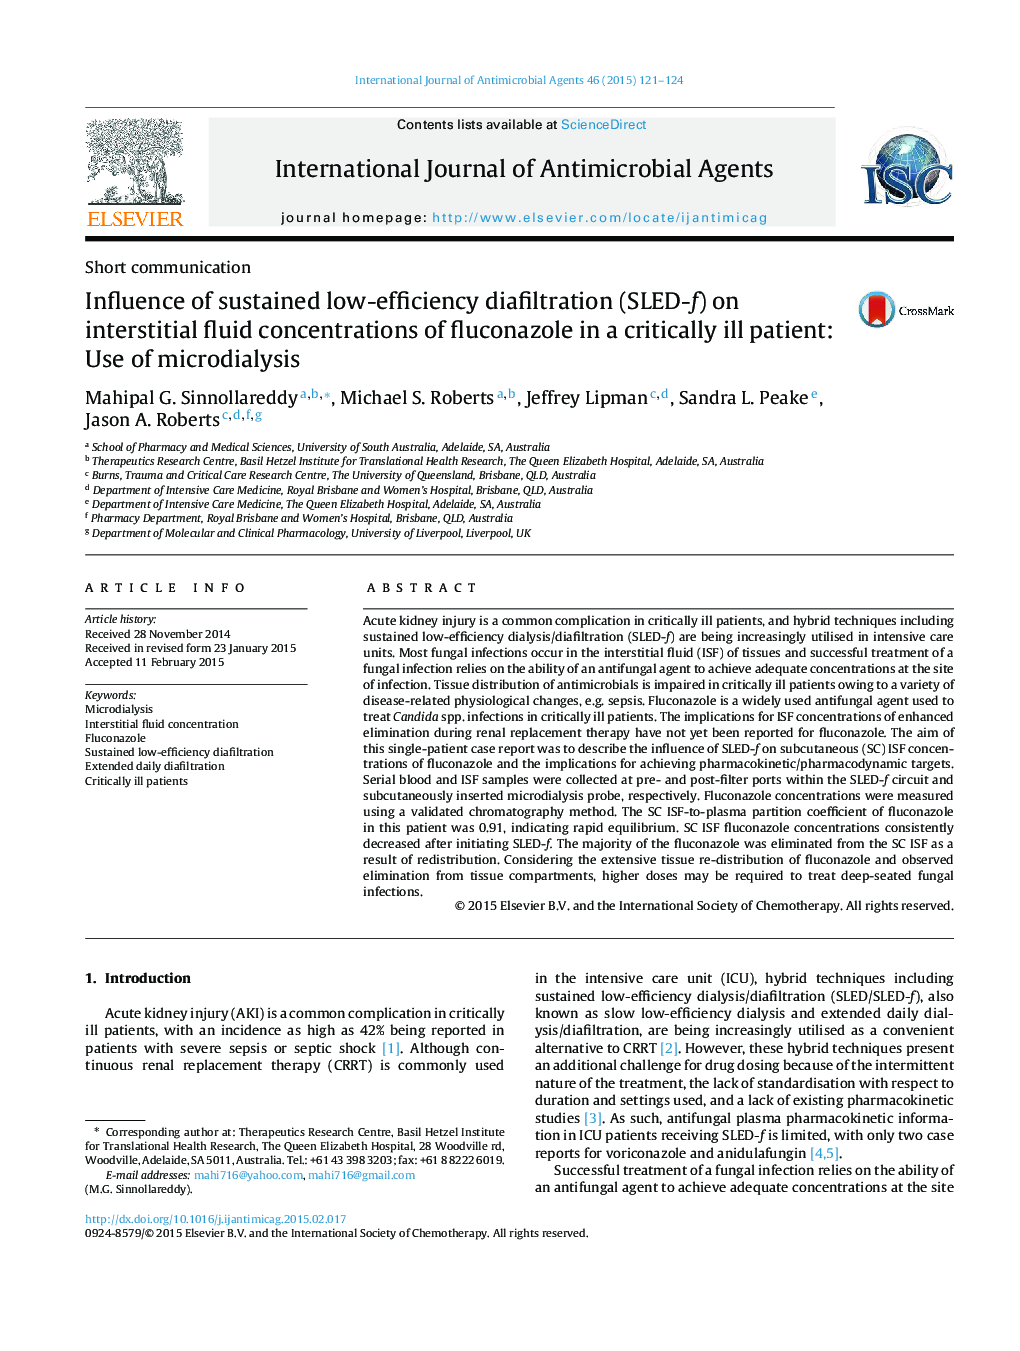 Influence of sustained low-efficiency diafiltration (SLED-f) on interstitial fluid concentrations of fluconazole in a critically ill patient: Use of microdialysis